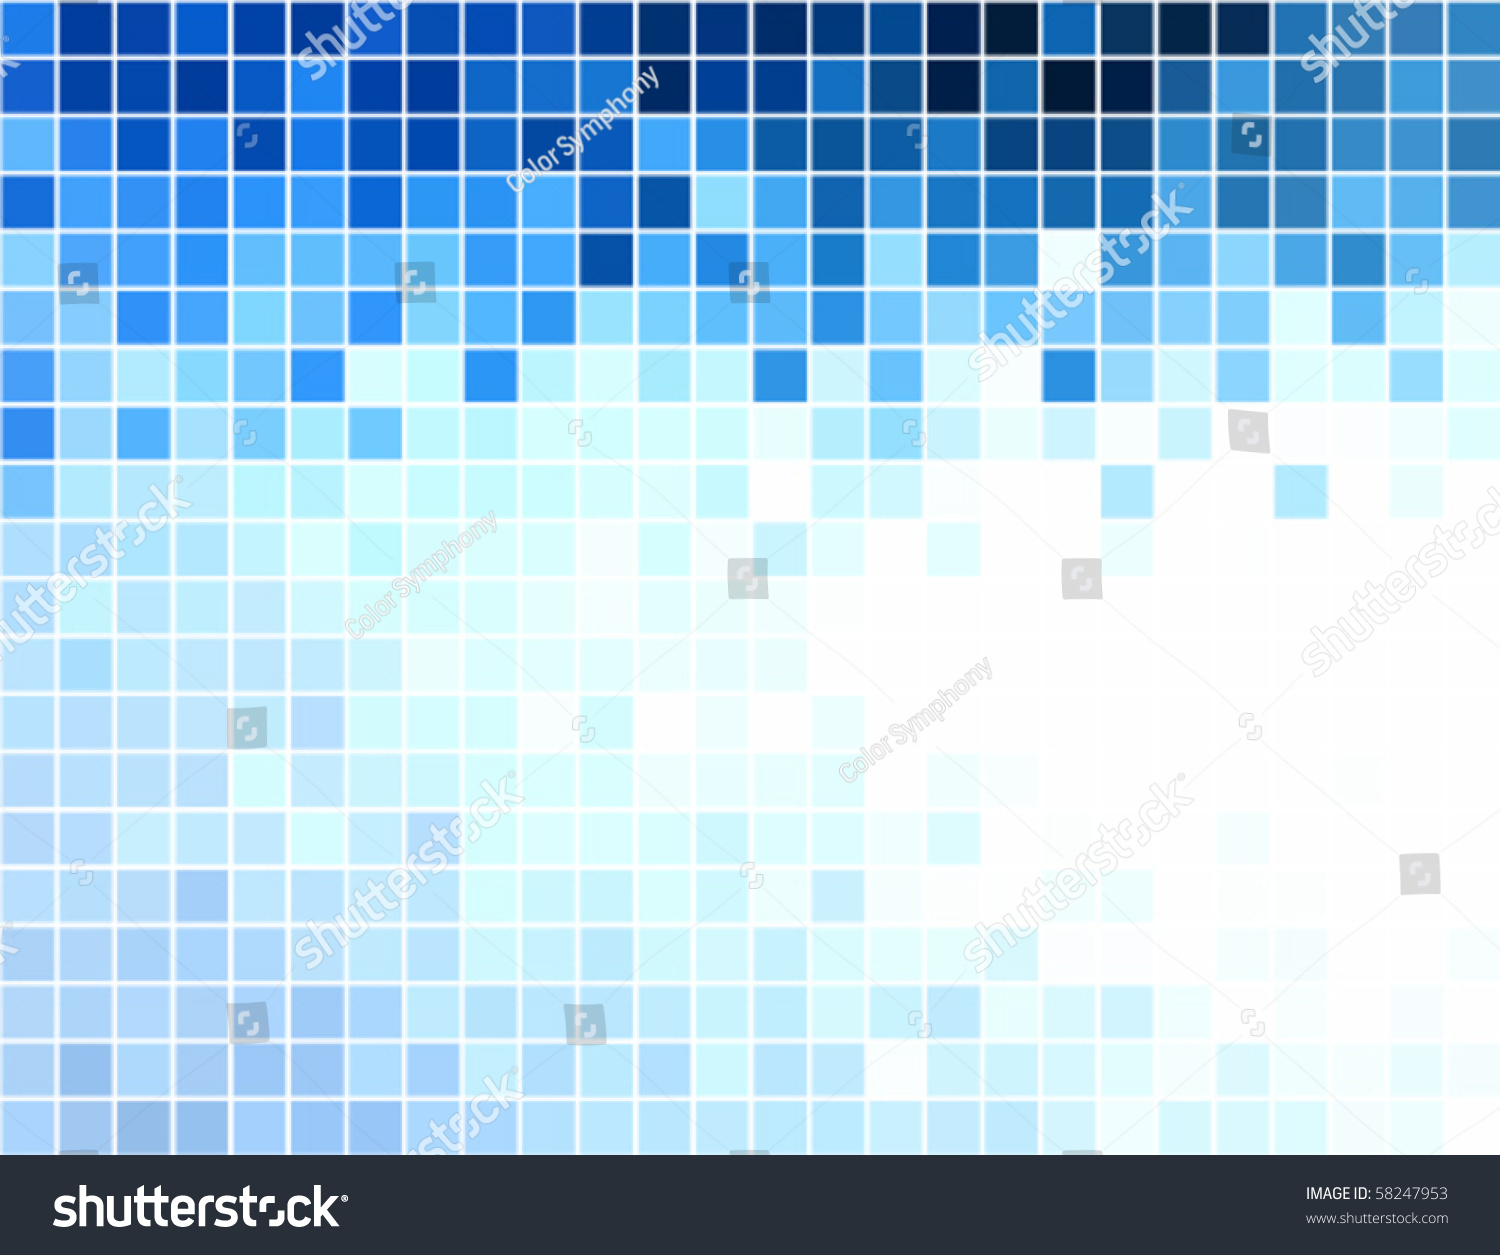 Abstract Square Pixel Mosaic Background Stock Vector Illustration ...